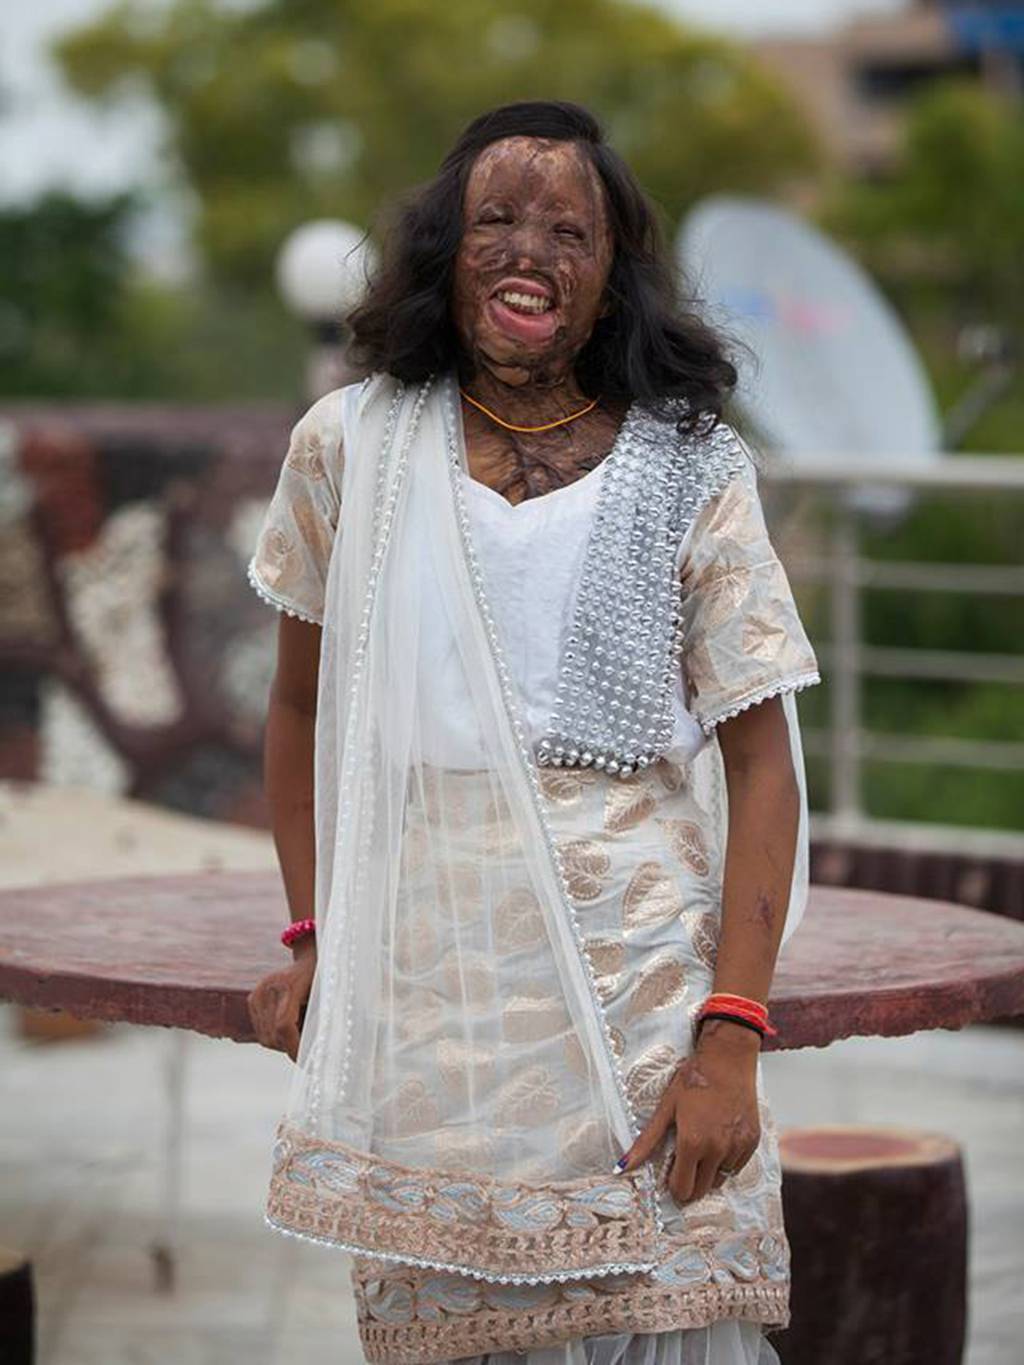 redsuelo:  amberrosehairline:  myvoicemyright:   Acid attack survivors in India model